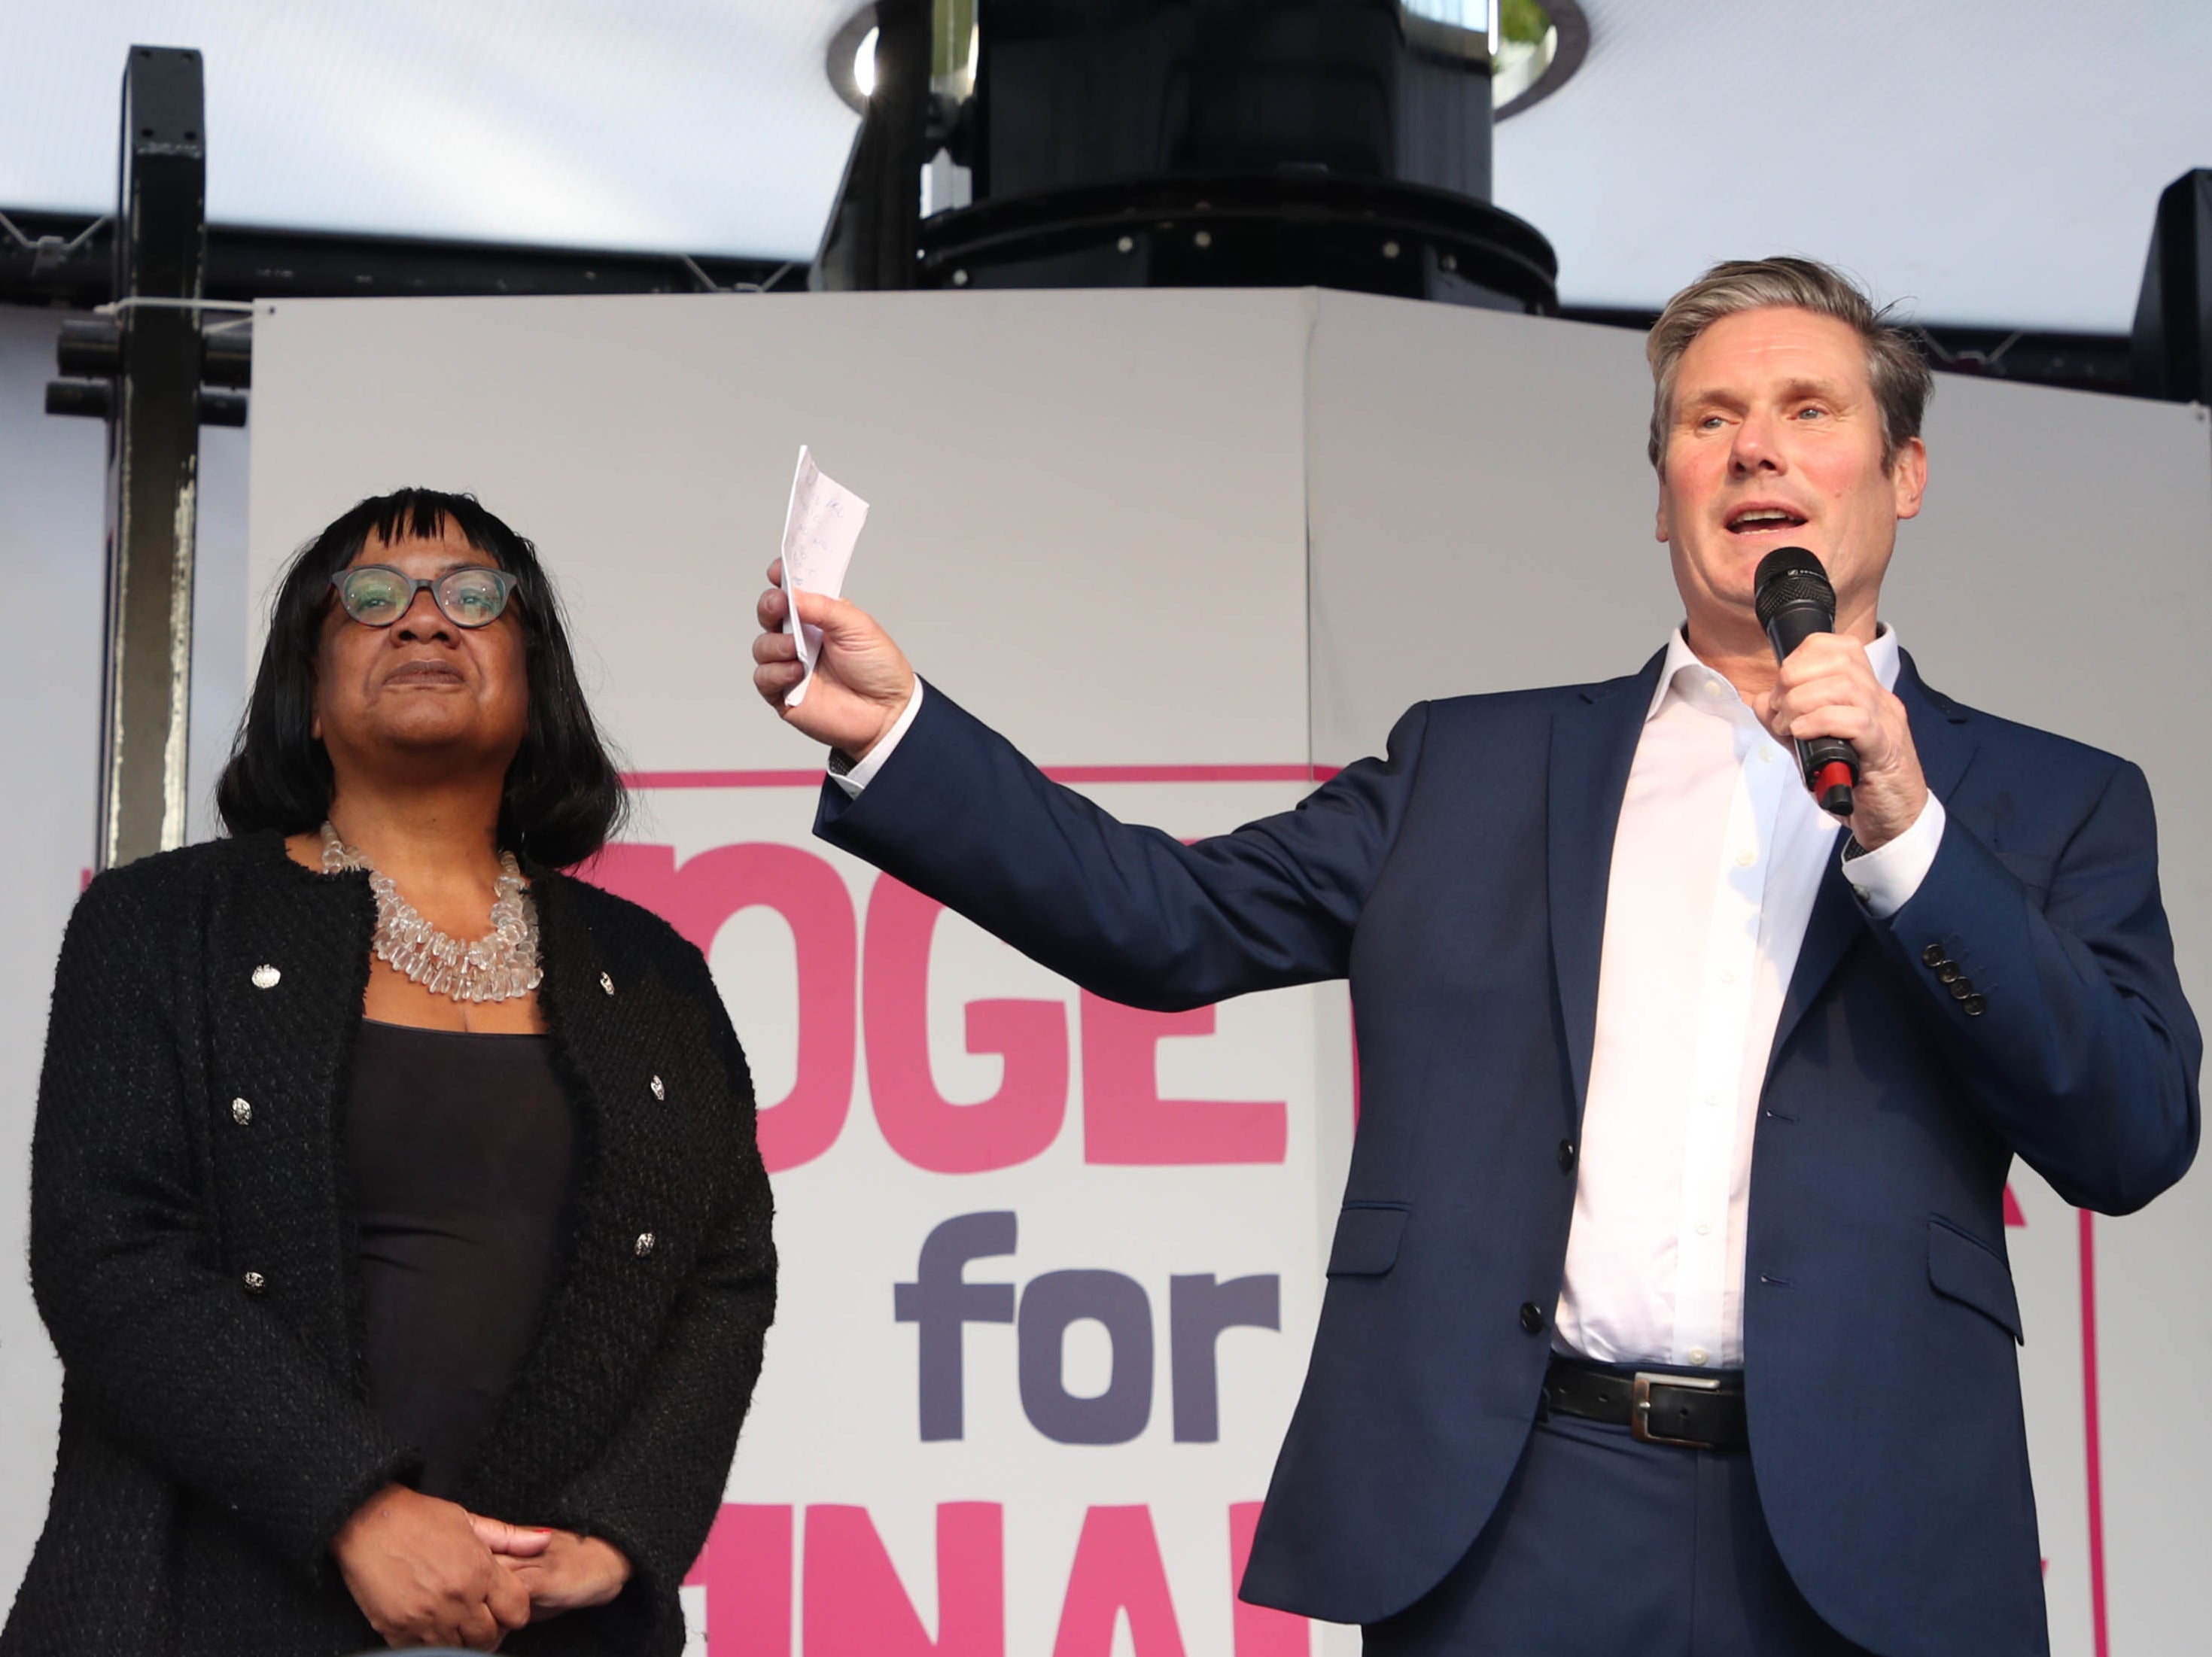 Diane Abbott at a 2019 rally with Labour’s then shadow Brexit secretary Keir Starmer